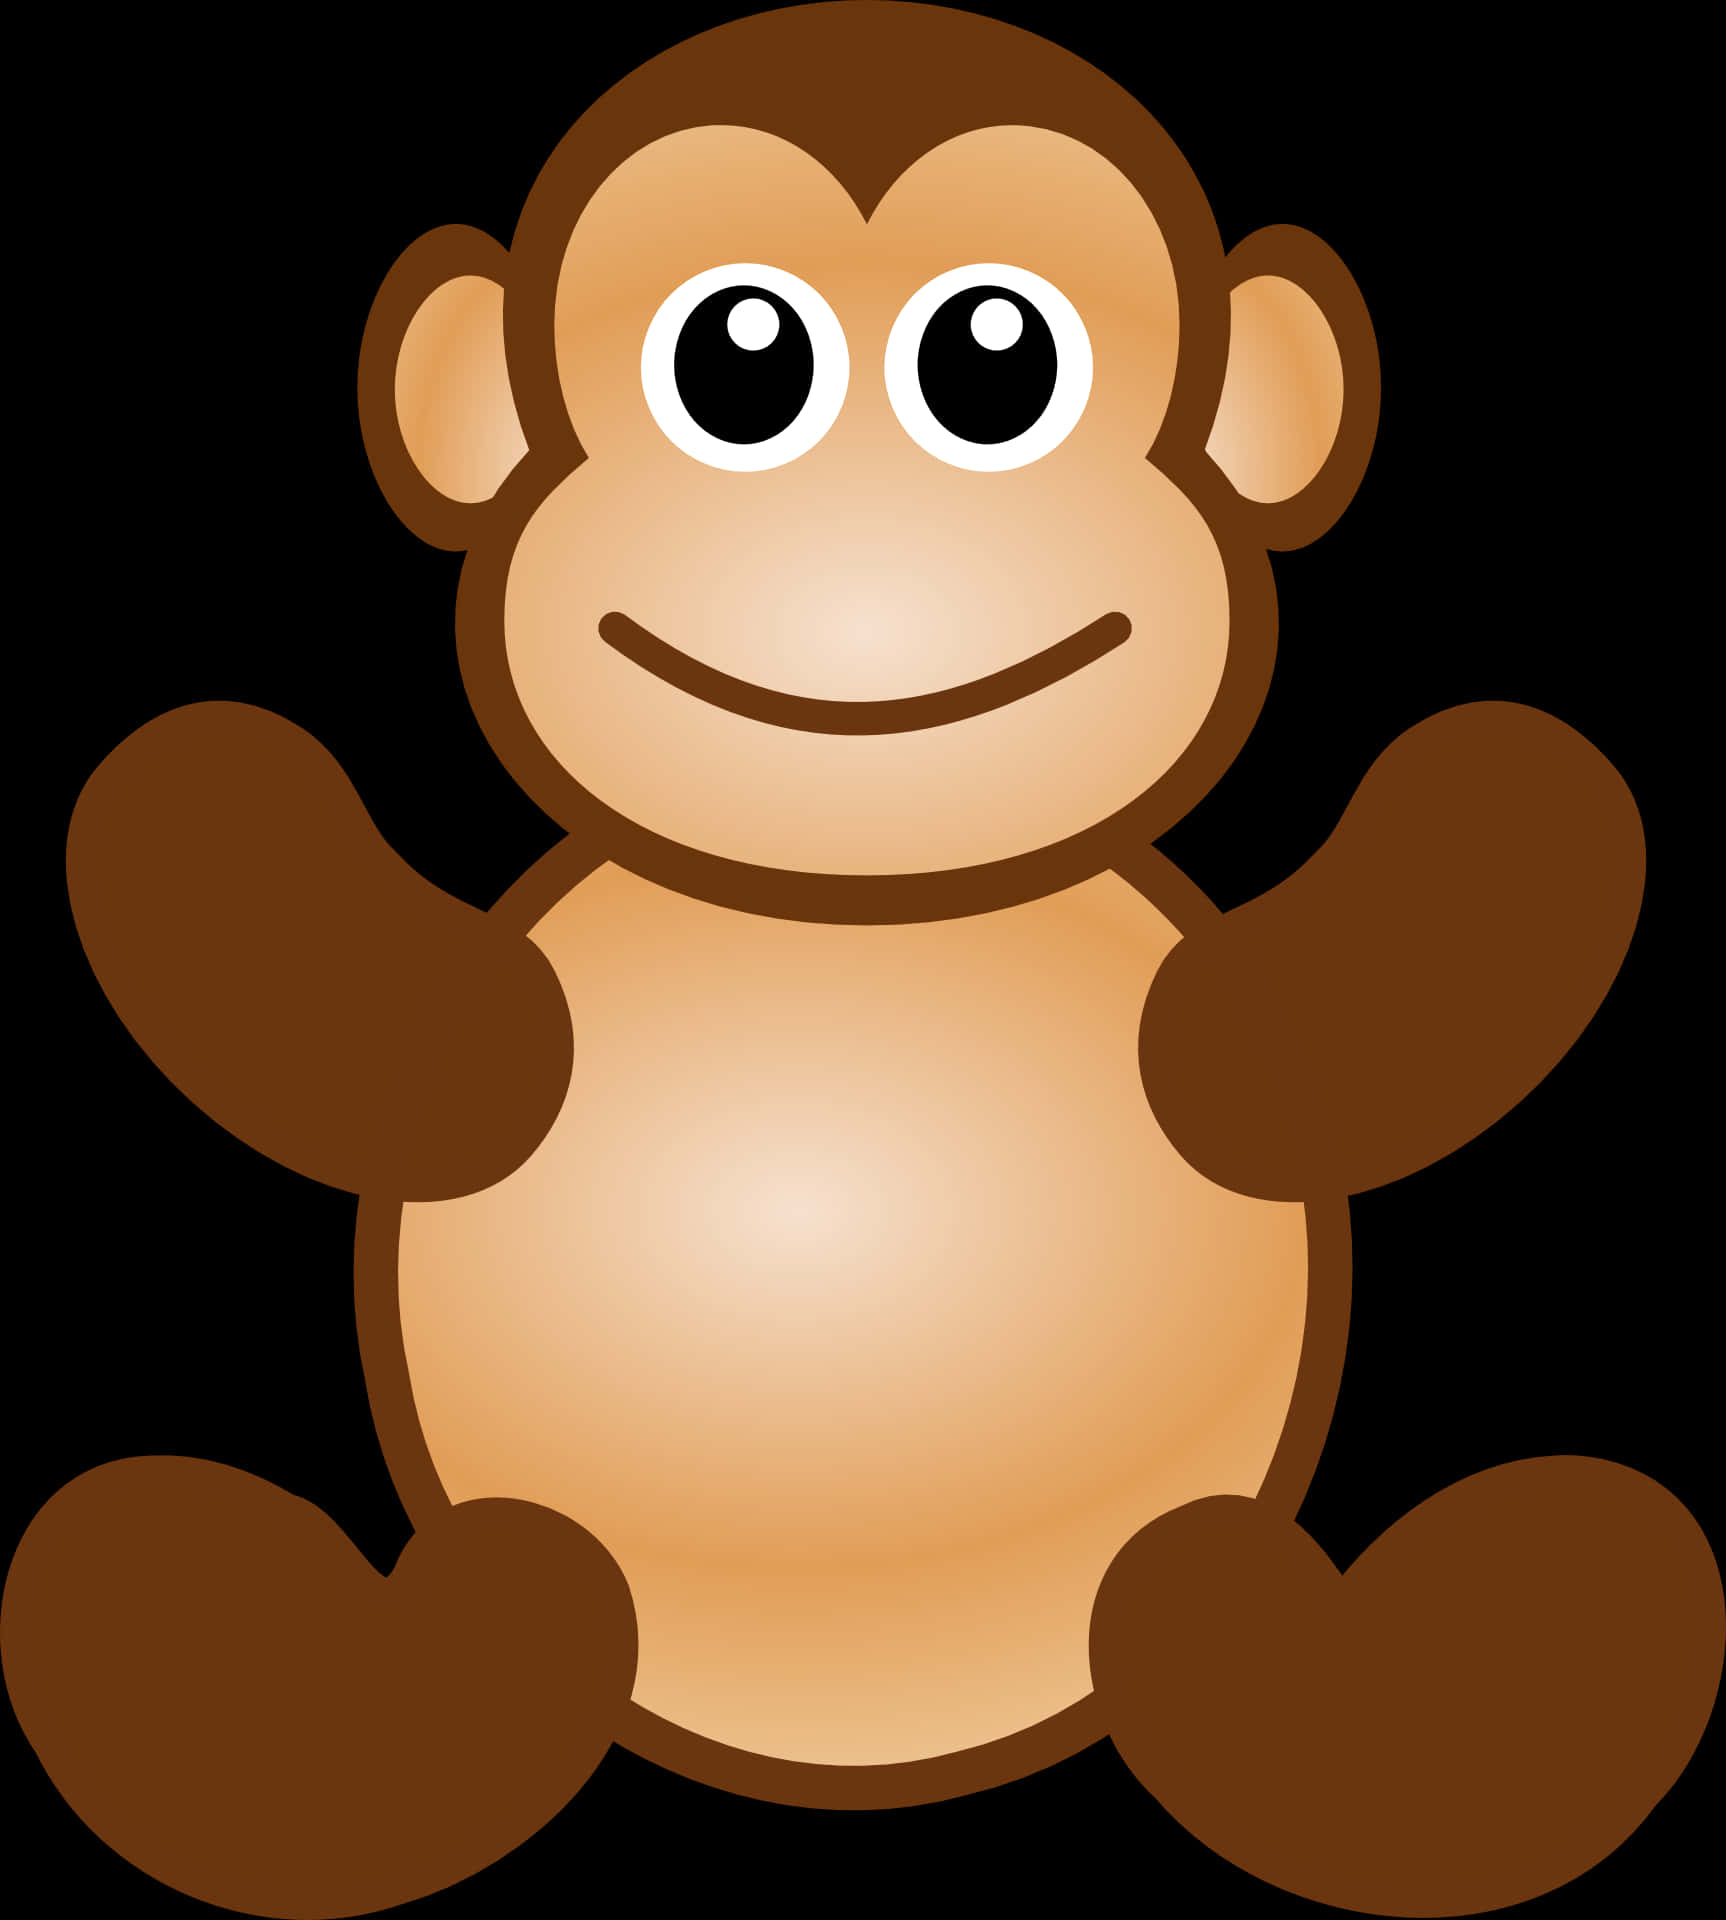 Curious George Cartoon Monkey PNG